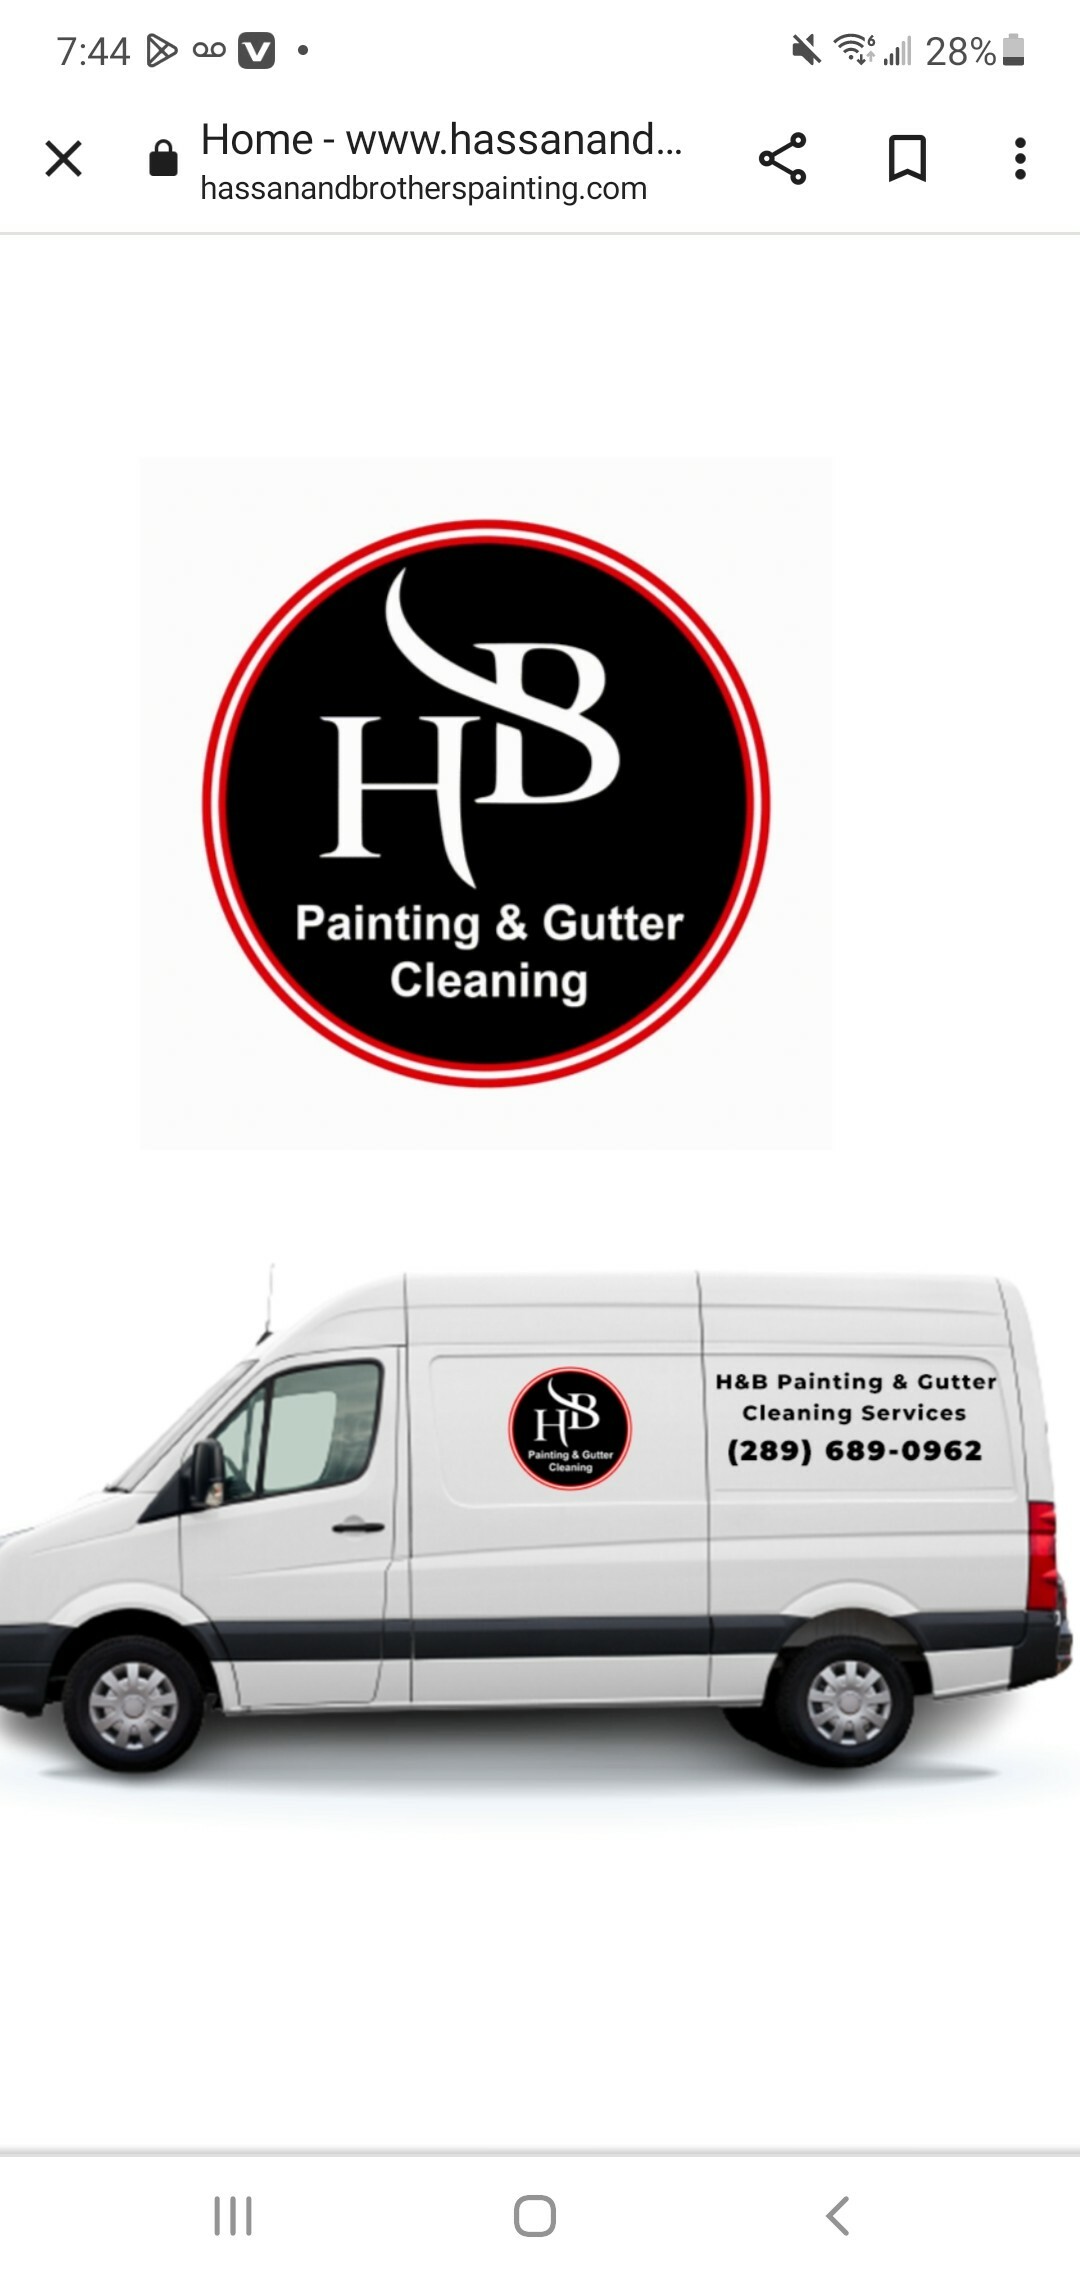 Hassan and Brothers Painting & Gutter Cleaning Services's logo